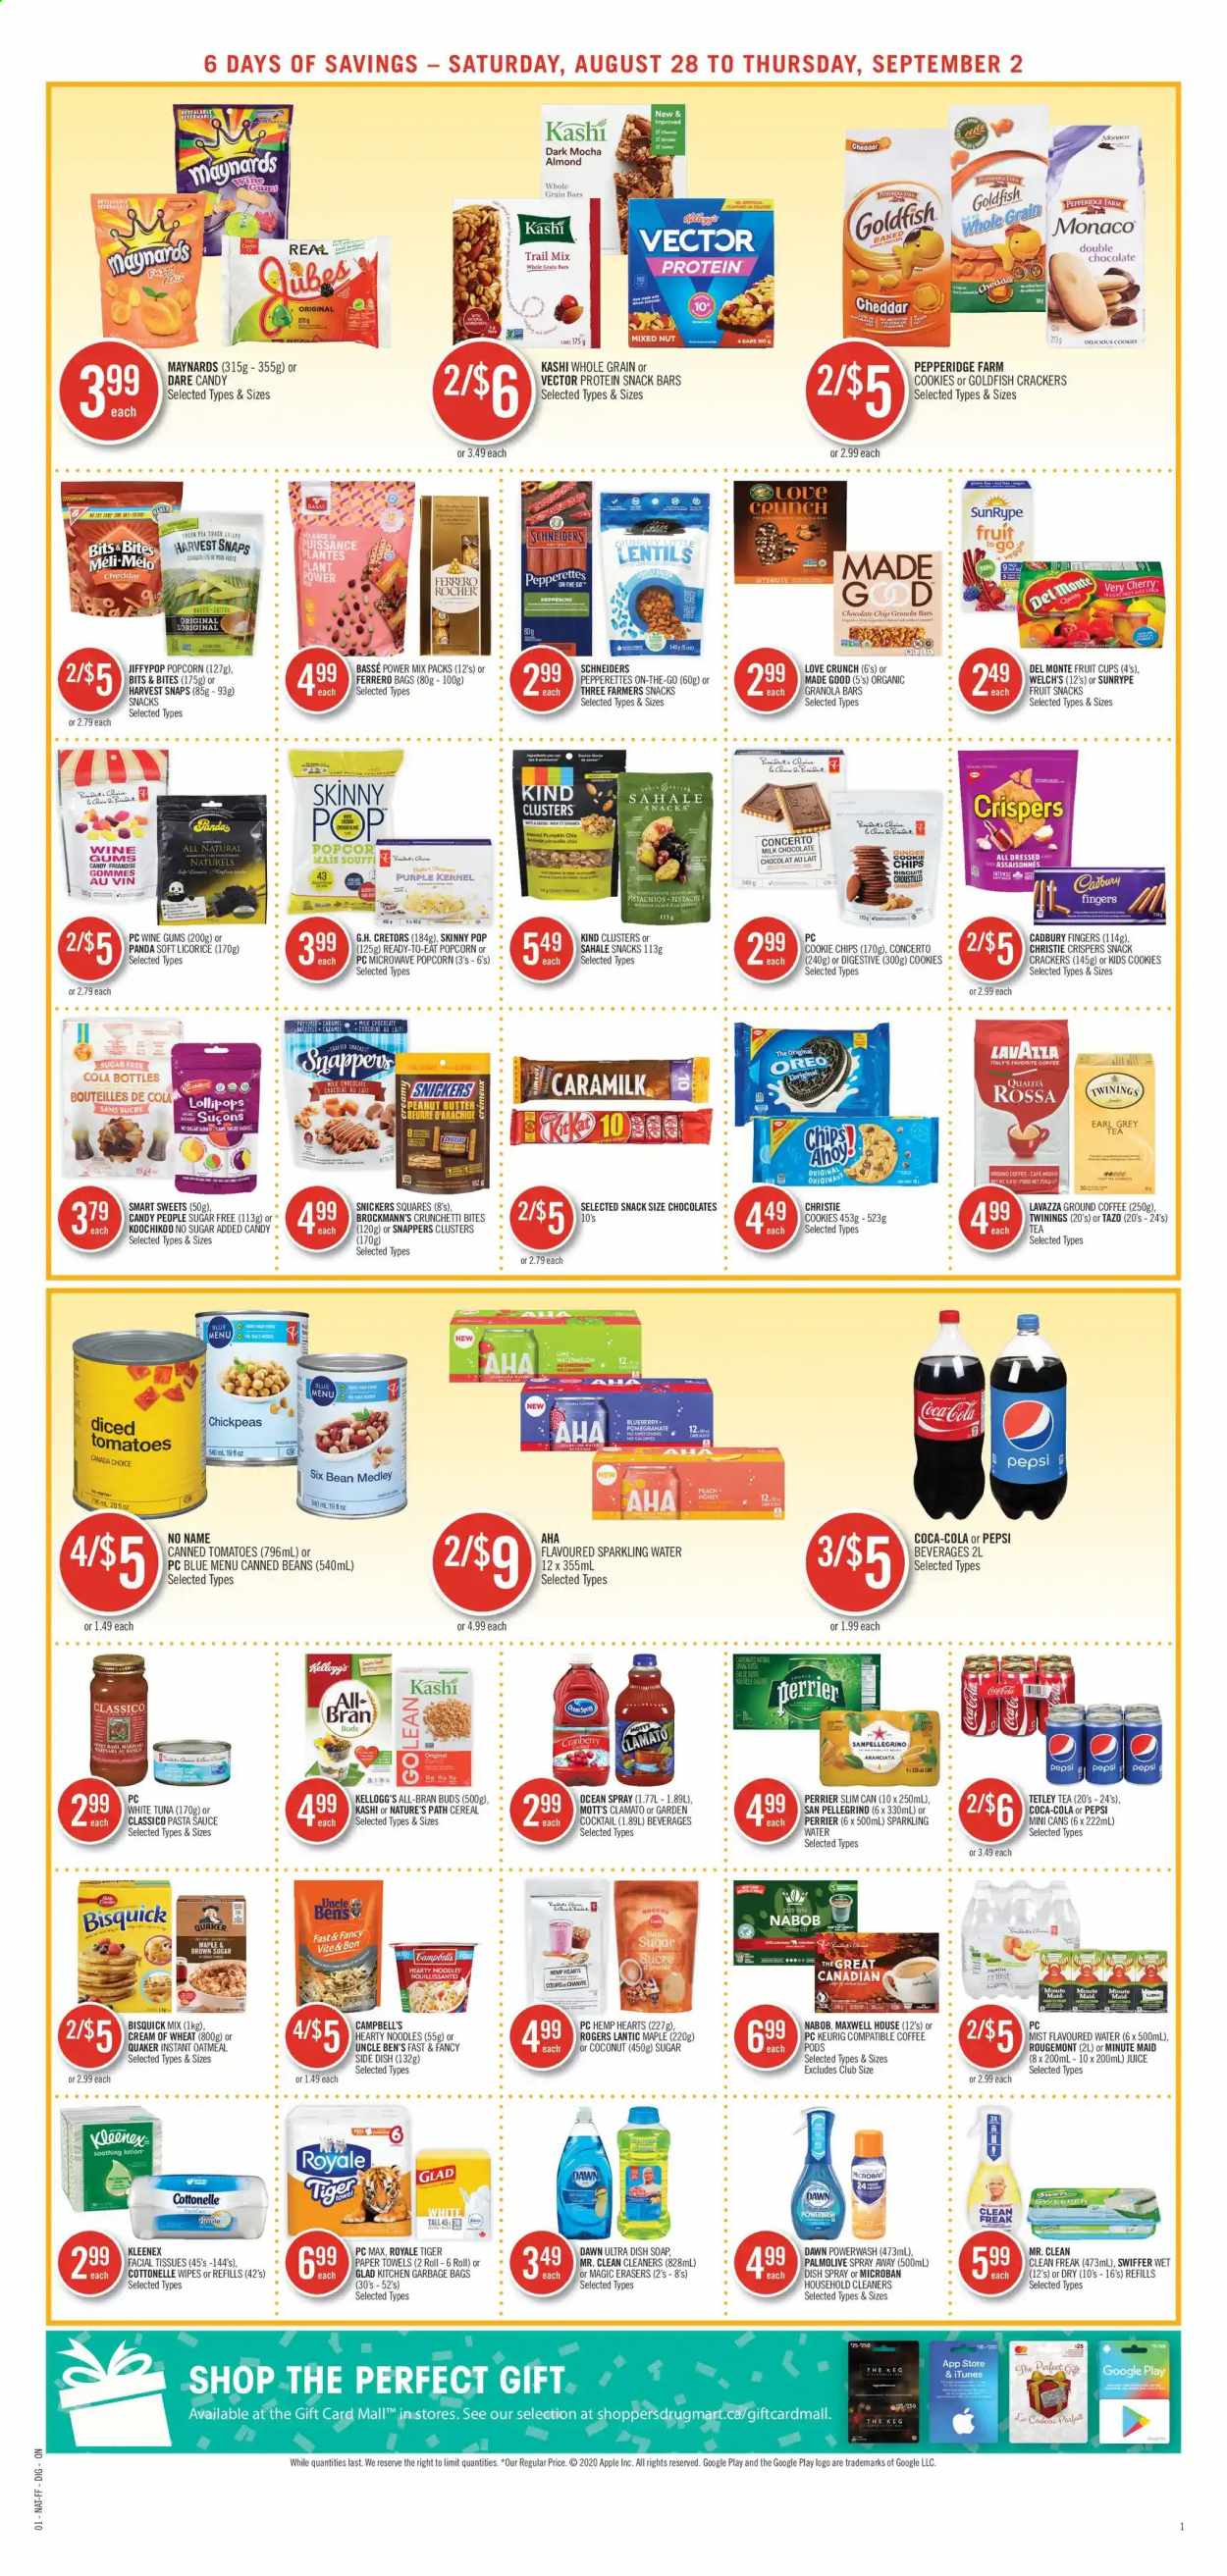 thumbnail - Shoppers Drug Mart Flyer - August 28, 2021 - September 02, 2021 - Sales products - cookies, milk chocolate, Snickers, crackers, lollipop, Kellogg's, biscuit, Cadbury, Digestive, Welch's, fruit snack, snack bar, Mott's, popcorn, Goldfish, Skinny Pop, Bisquick, oatmeal, Harvest Snaps, lentils, pumpkin, pasta sauce, sauce, Uncle Ben's, cereals, Cream of Wheat, granola bar, protein snack, Quaker, All-Bran, chickpeas, noodles, ginger, Campbell's, Classico, honey, trail mix, Coca-Cola, Pepsi, juice, Clamato, Perrier, fruit punch, sparkling water, San Pellegrino, Maxwell House, tea, Twinings, coffee pods, ground coffee, Keurig, Lavazza, wipes, Cottonelle, Kleenex, tissues, kitchen towels, paper towels, Swiffer, Palmolive, soap, facial tissues, body lotion, Oreo, tuna, chips. Page 6.